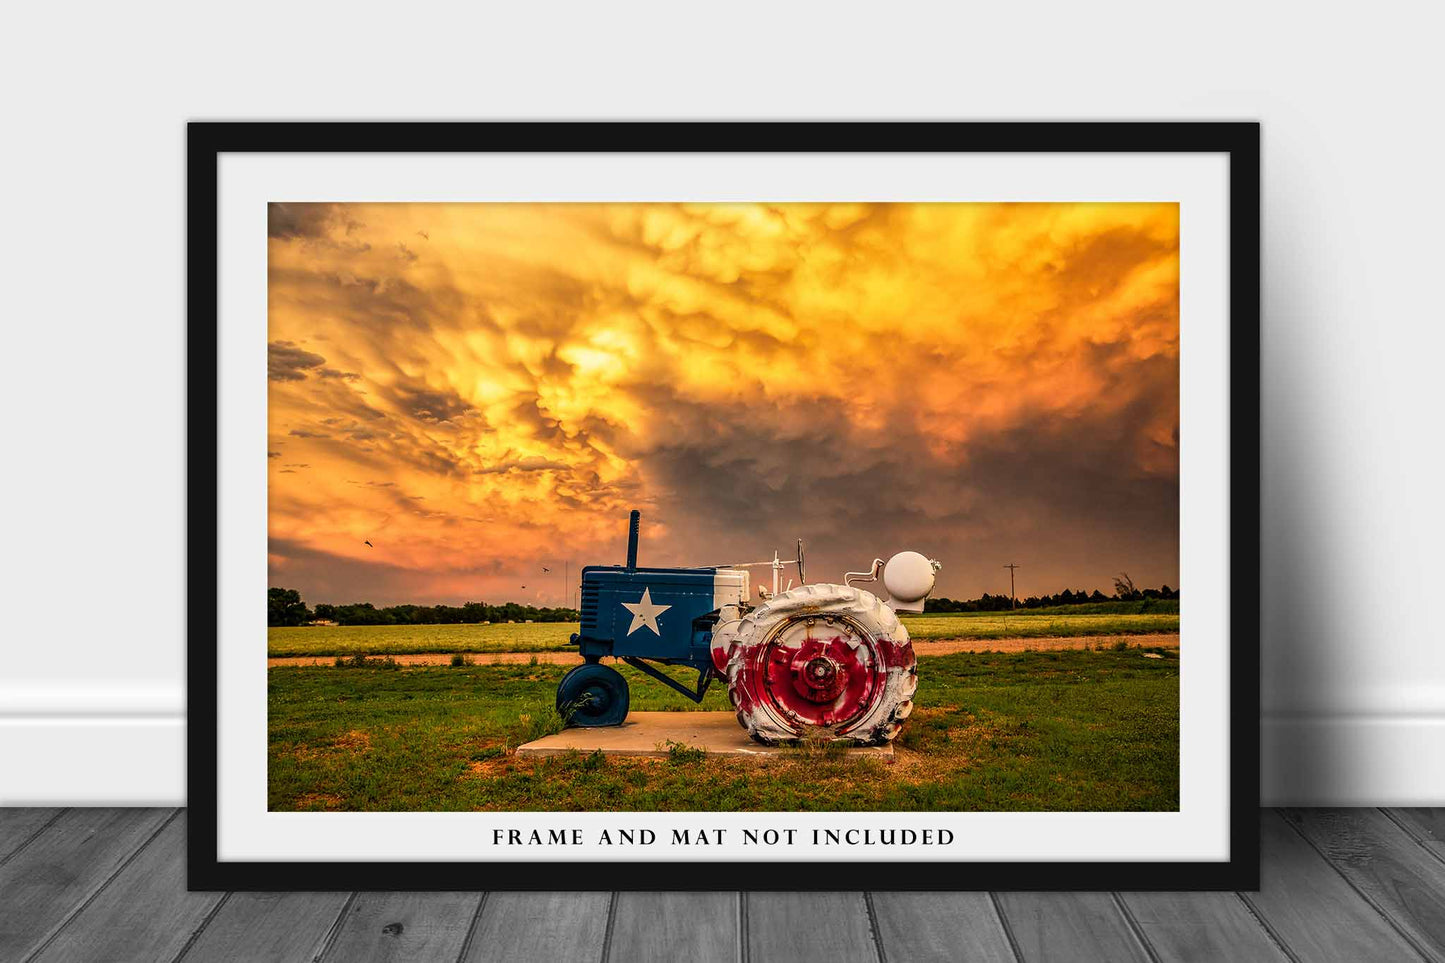 Texas Photography Print - Wall Art Picture of Tractor Painted in Texas Lonestar Flag Colors Under Stormy Sky Rural Farm Decor 5x7 to 40x60